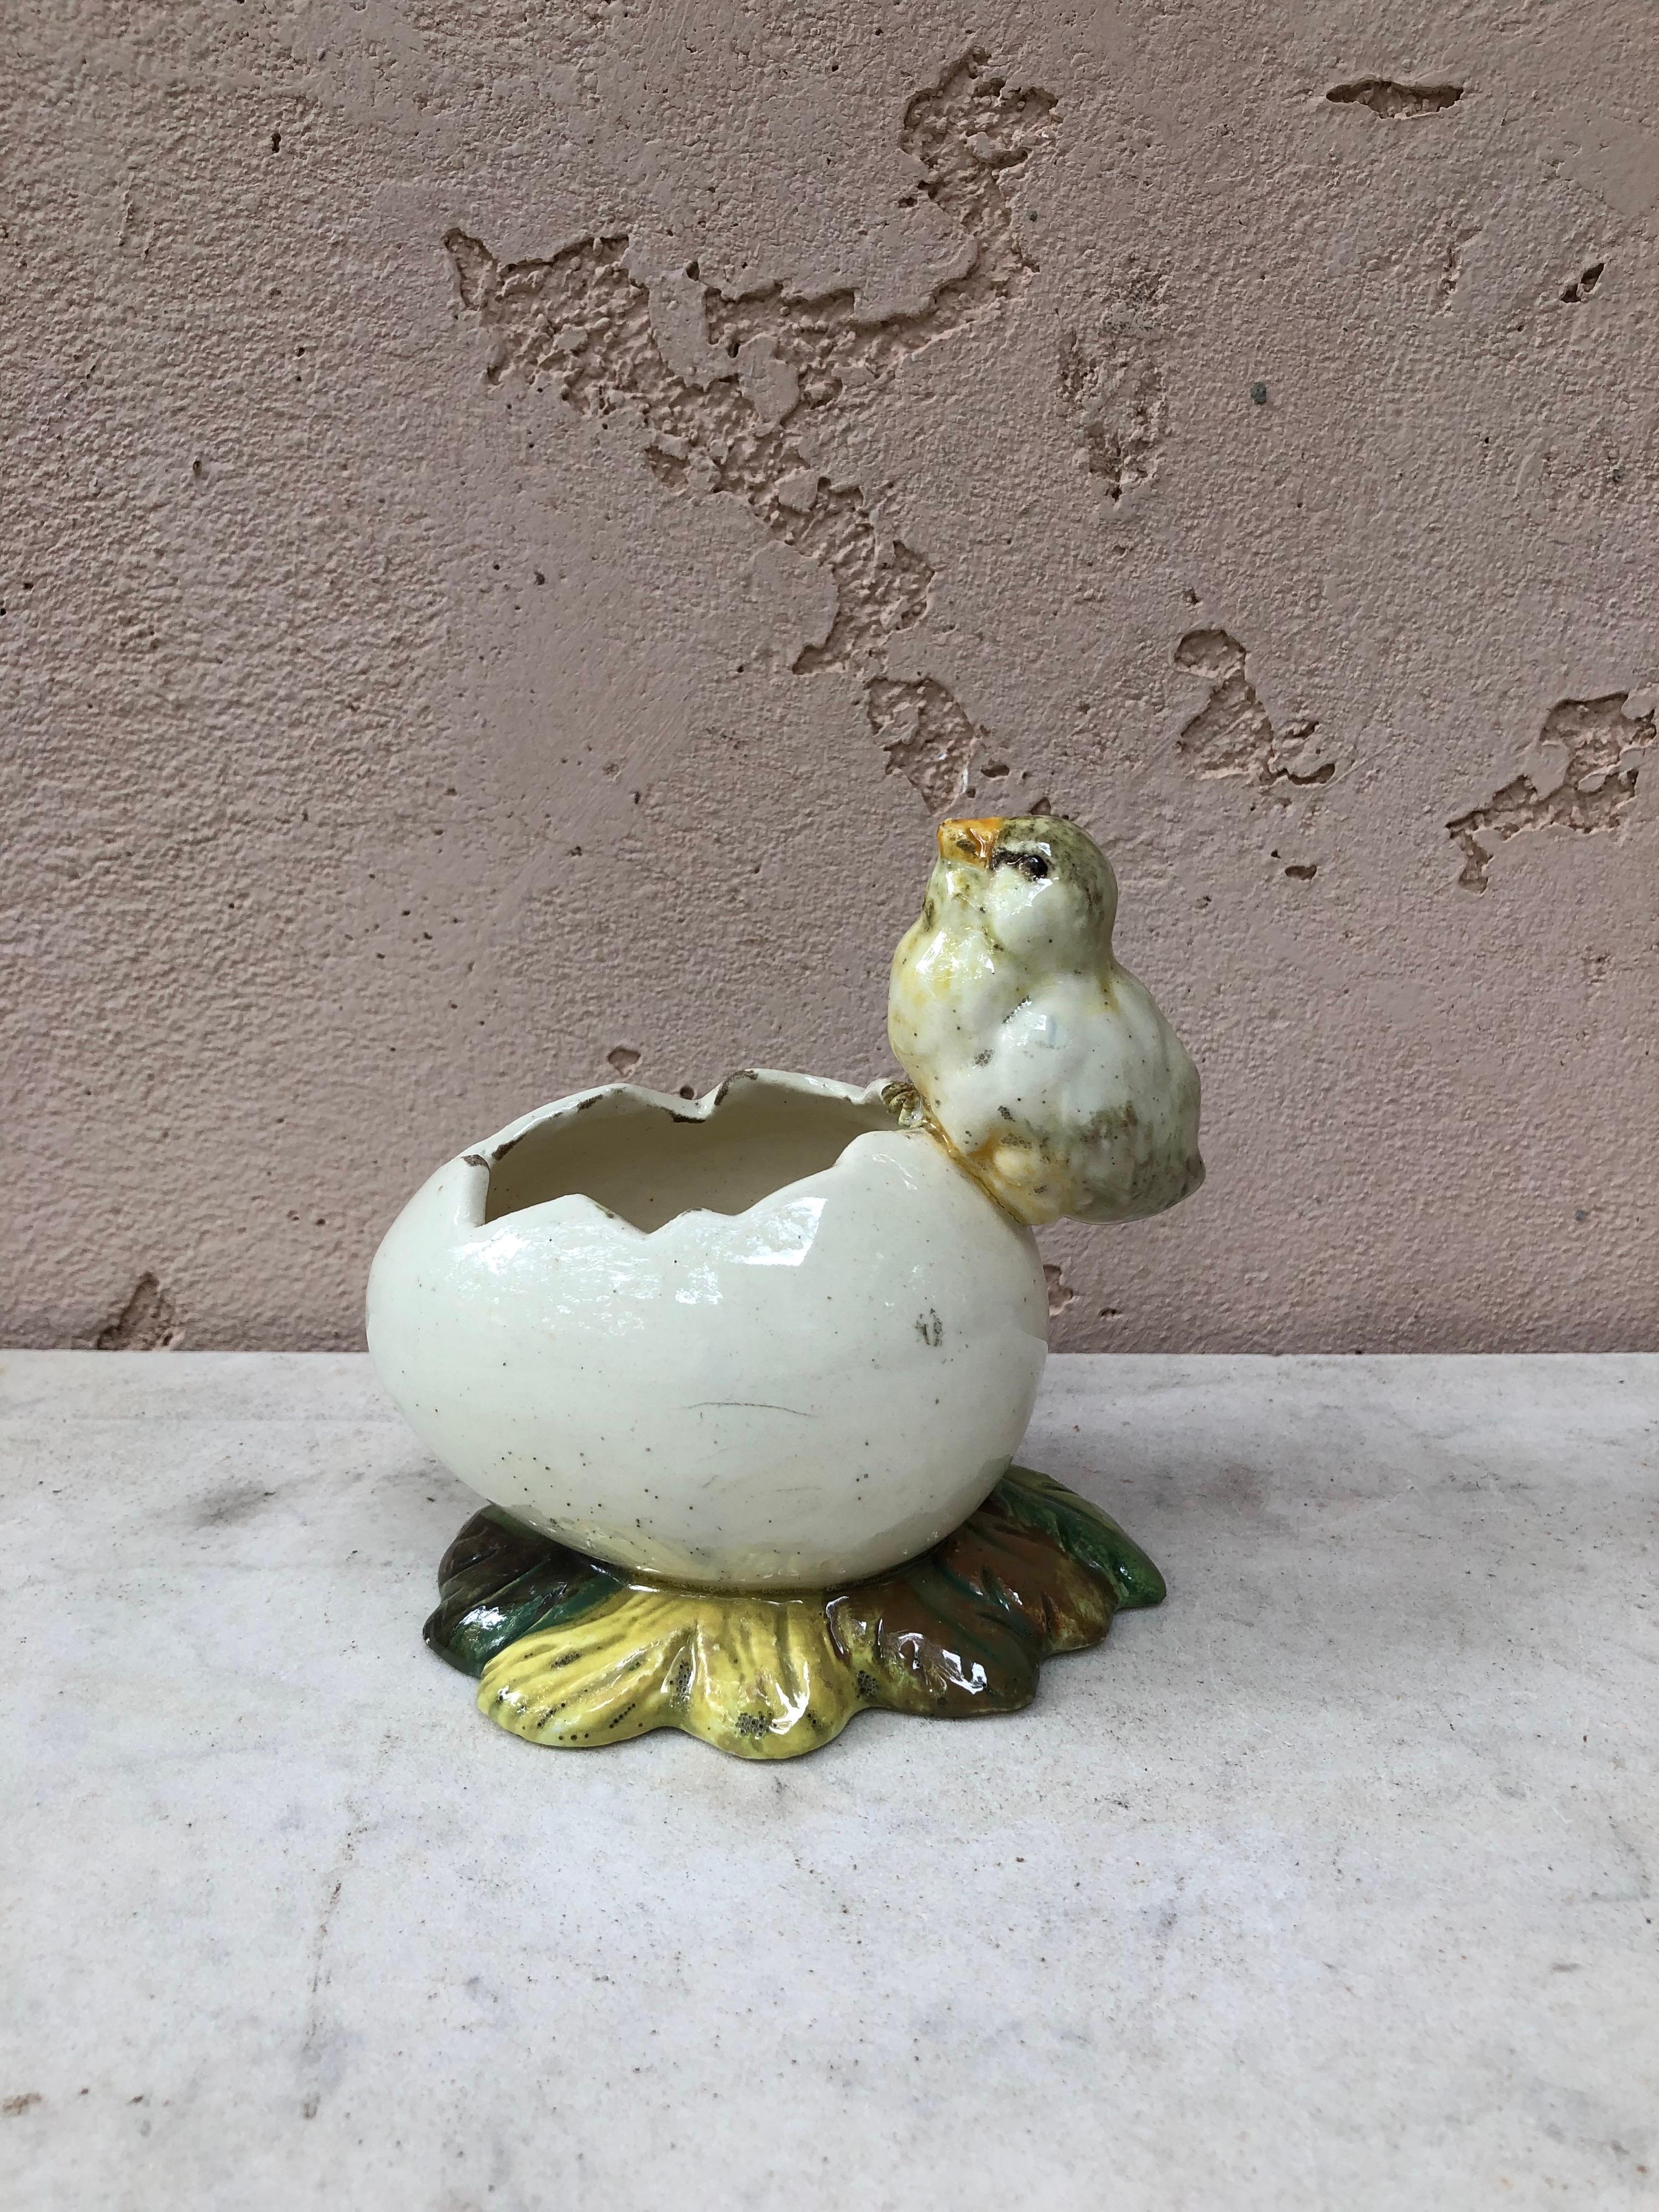 Rare Majolica chick with egg vase signed Delphin Massier with hand painted violets, circa 1900.
Measures: Length / 5.5 on 3.8 inches, height / 5 inches.